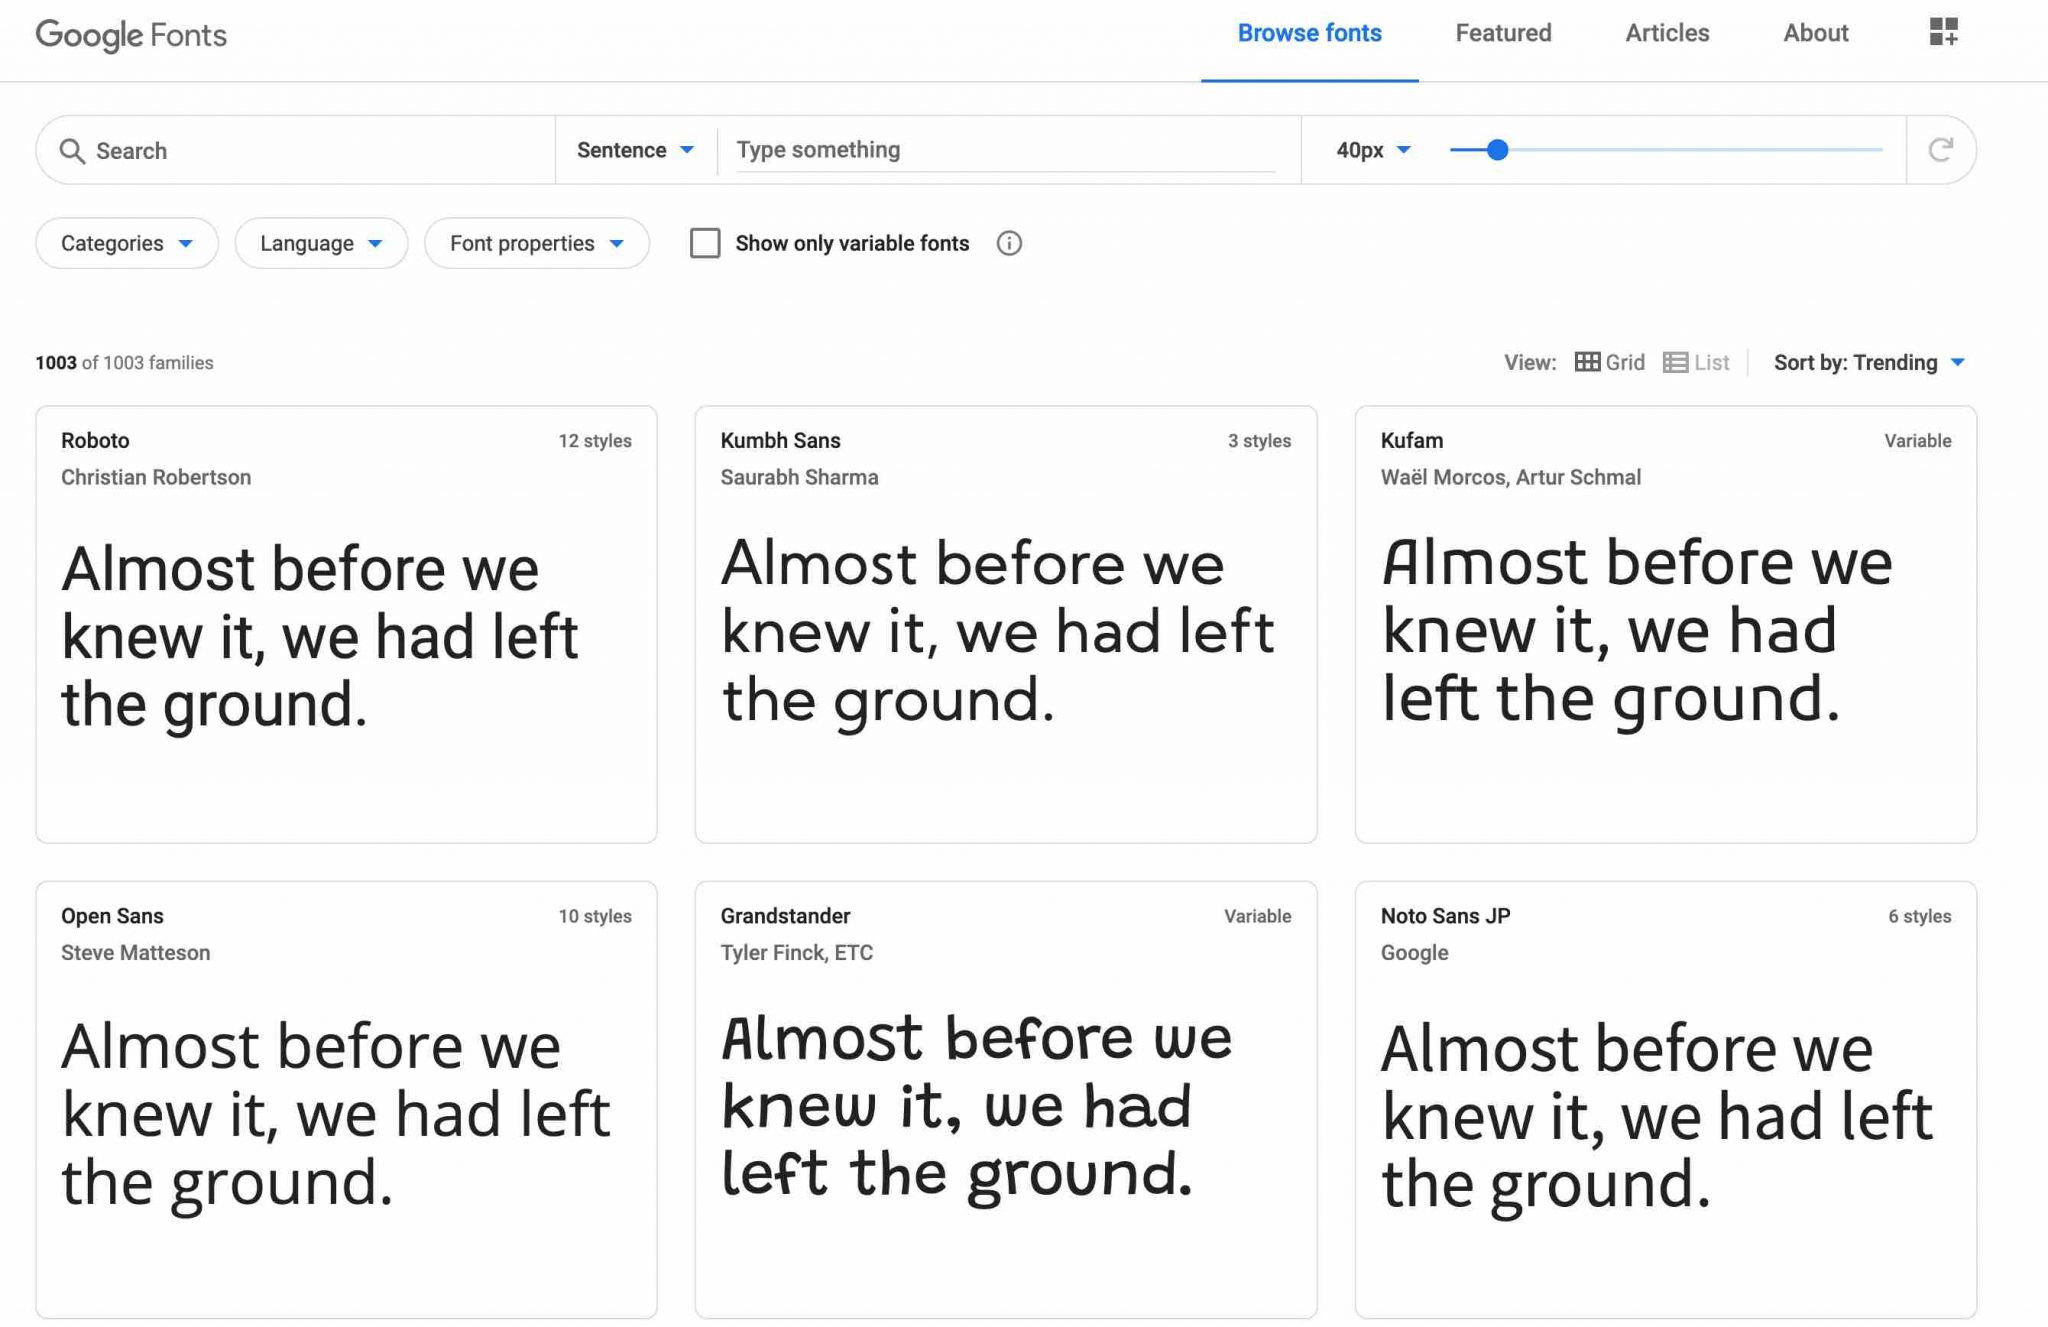 Google Fonts as presented on their website